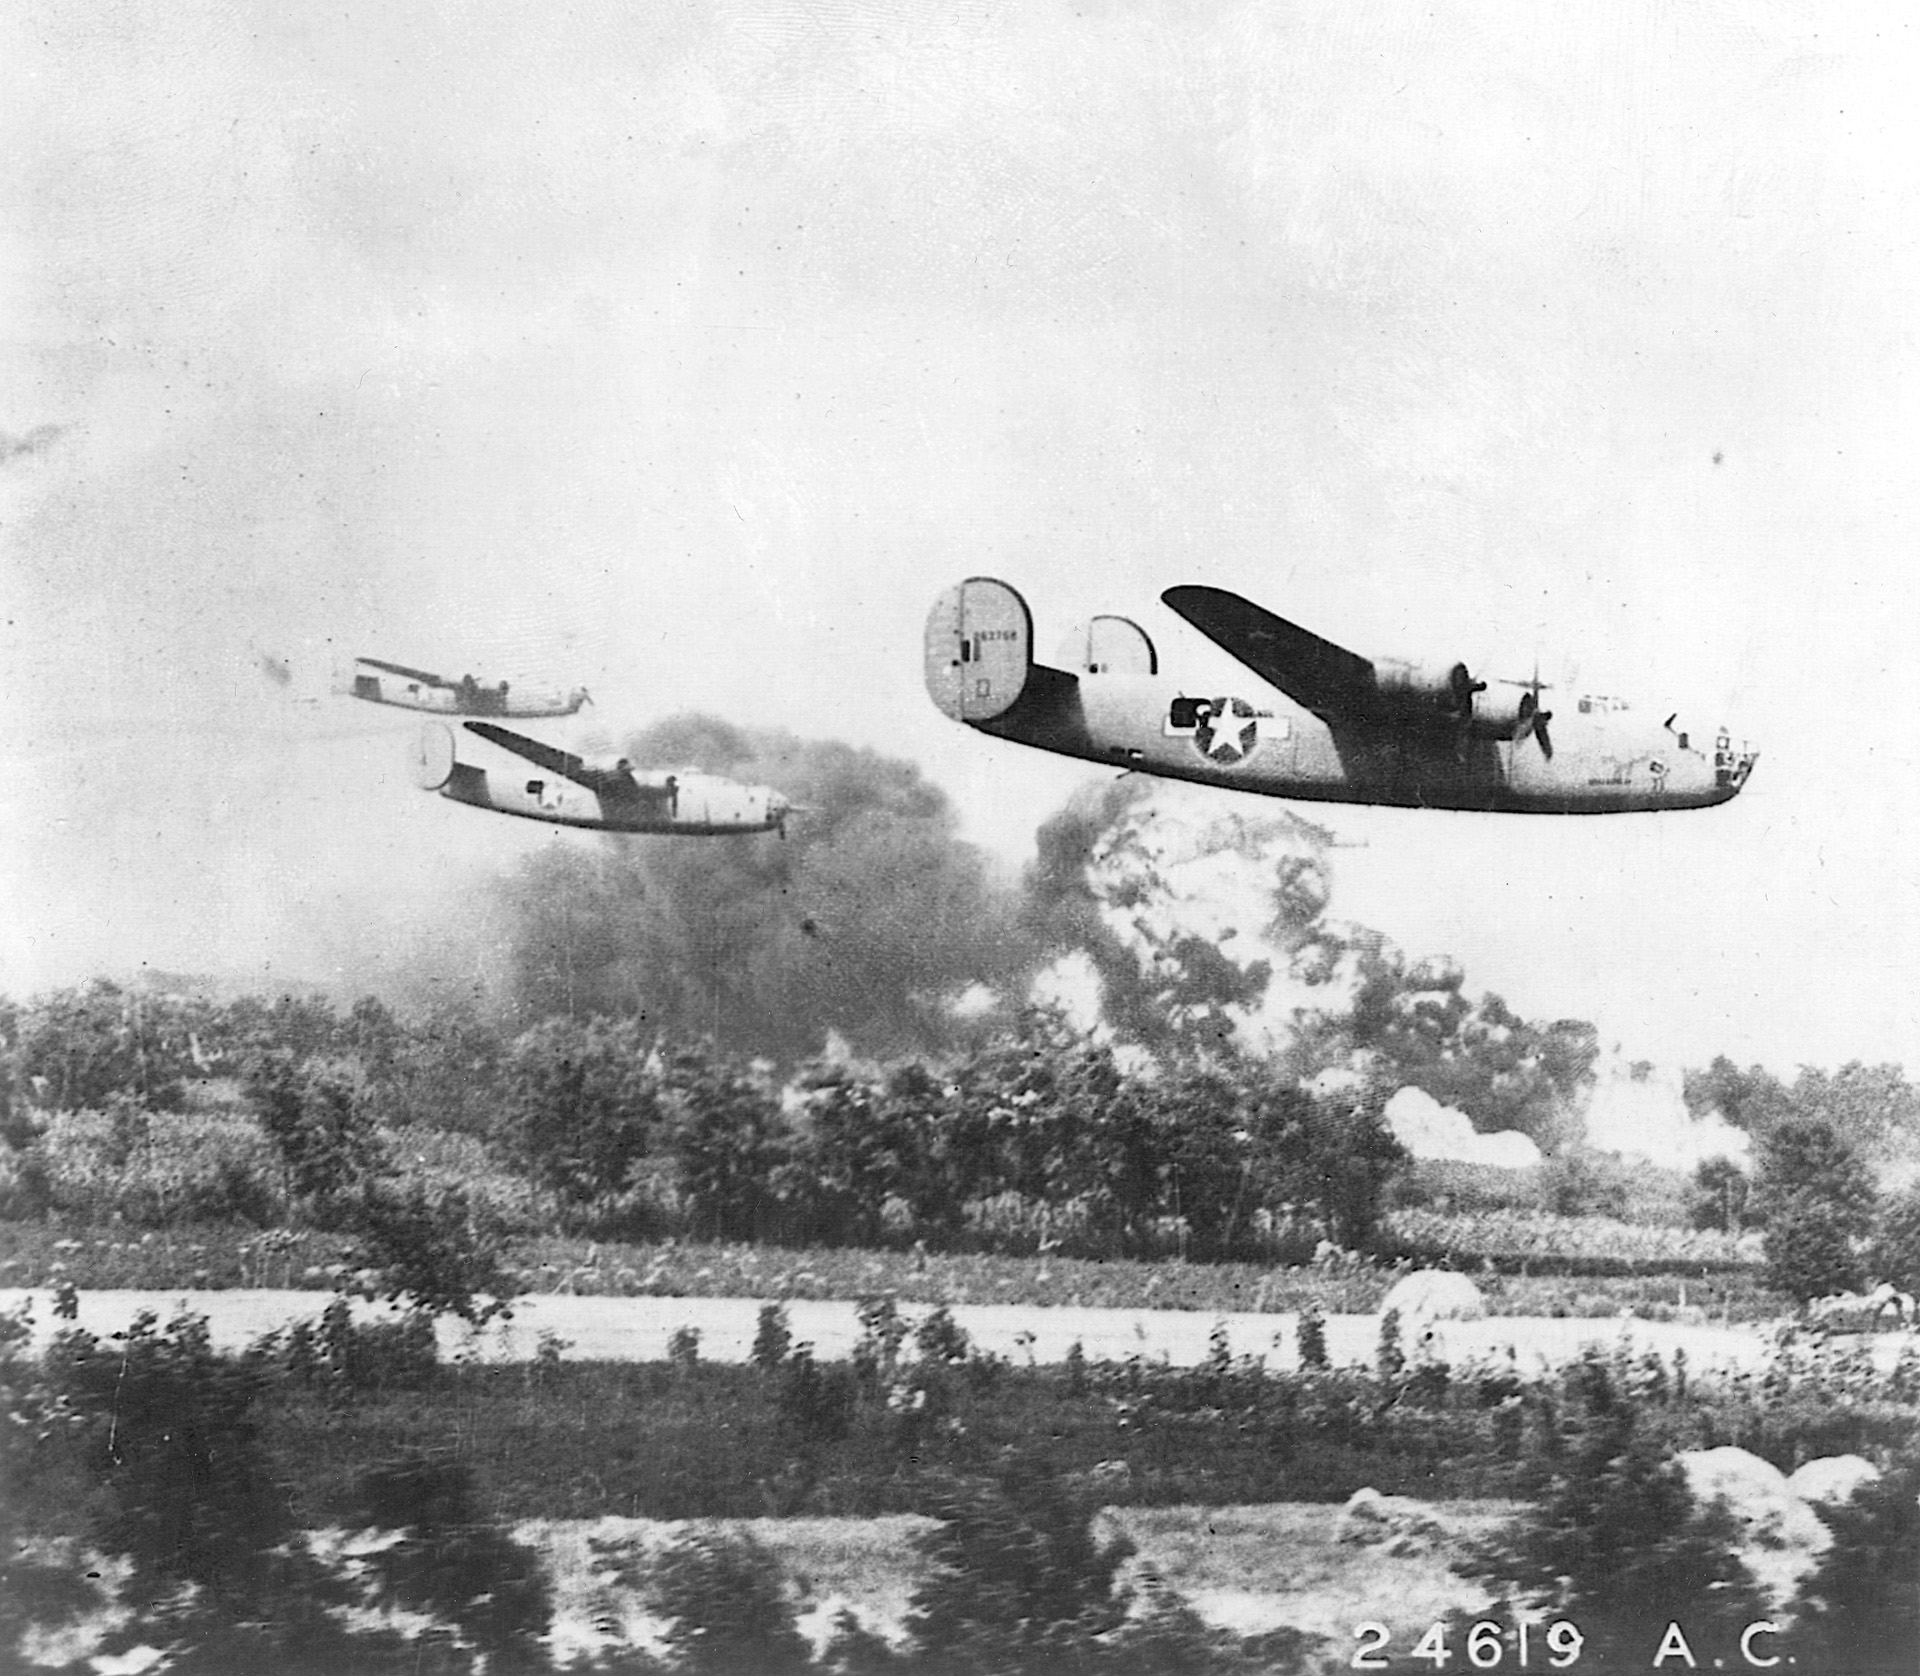 B-24s press home their low-level attacks during the epic raid against the oil refineries of Ploesti, Romania, on August 16, 1943. 